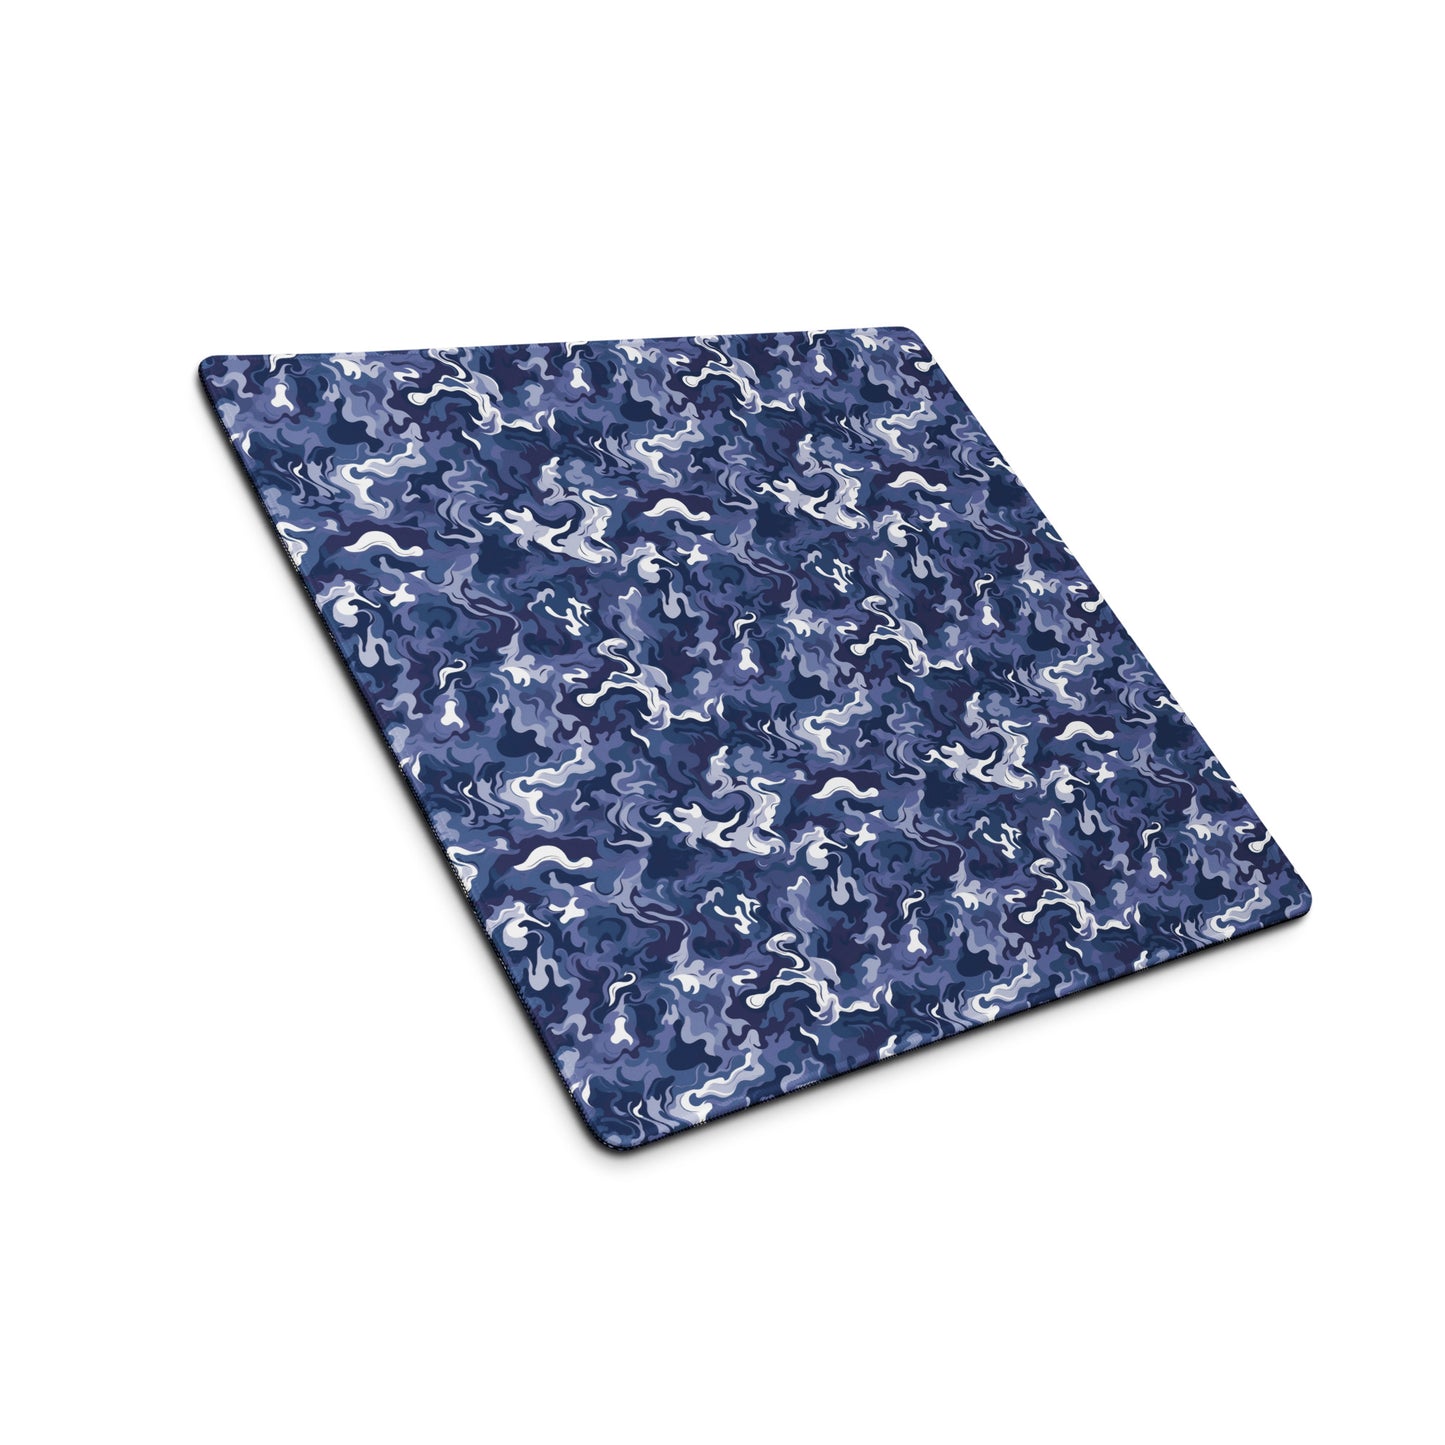 A 18" x 16" desk pad with a royal blue and white camo pattern sitting at an angle.